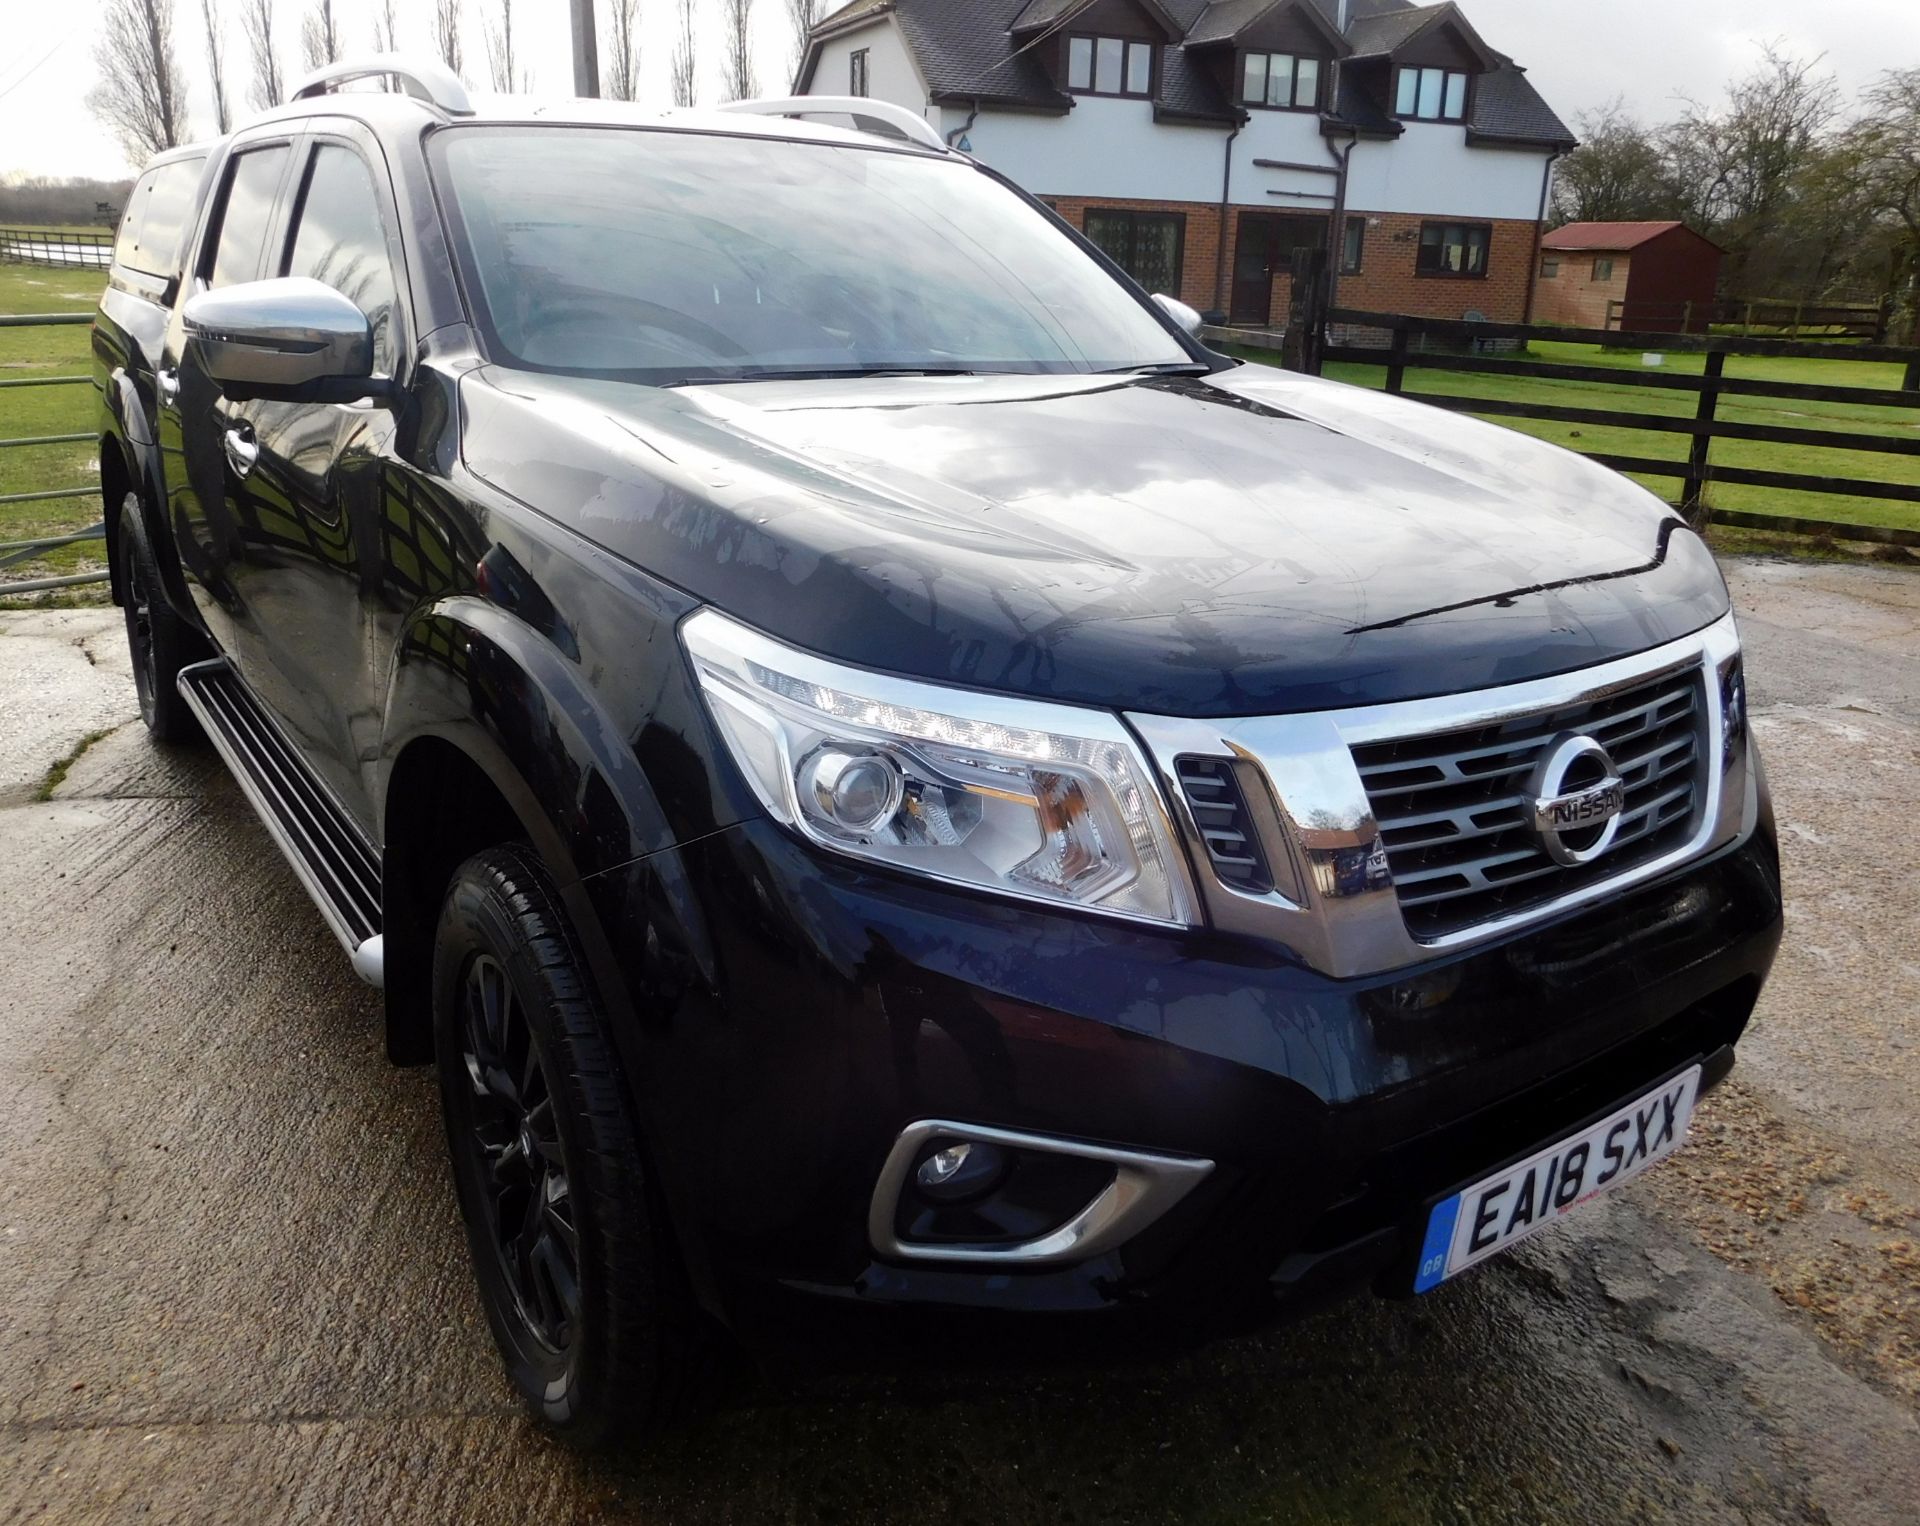 Nissan Navara Tekna 2.3 DCI 4wd Auto Double Cab Pick-up, EA18 SXX, First Registered 31/5/2018,